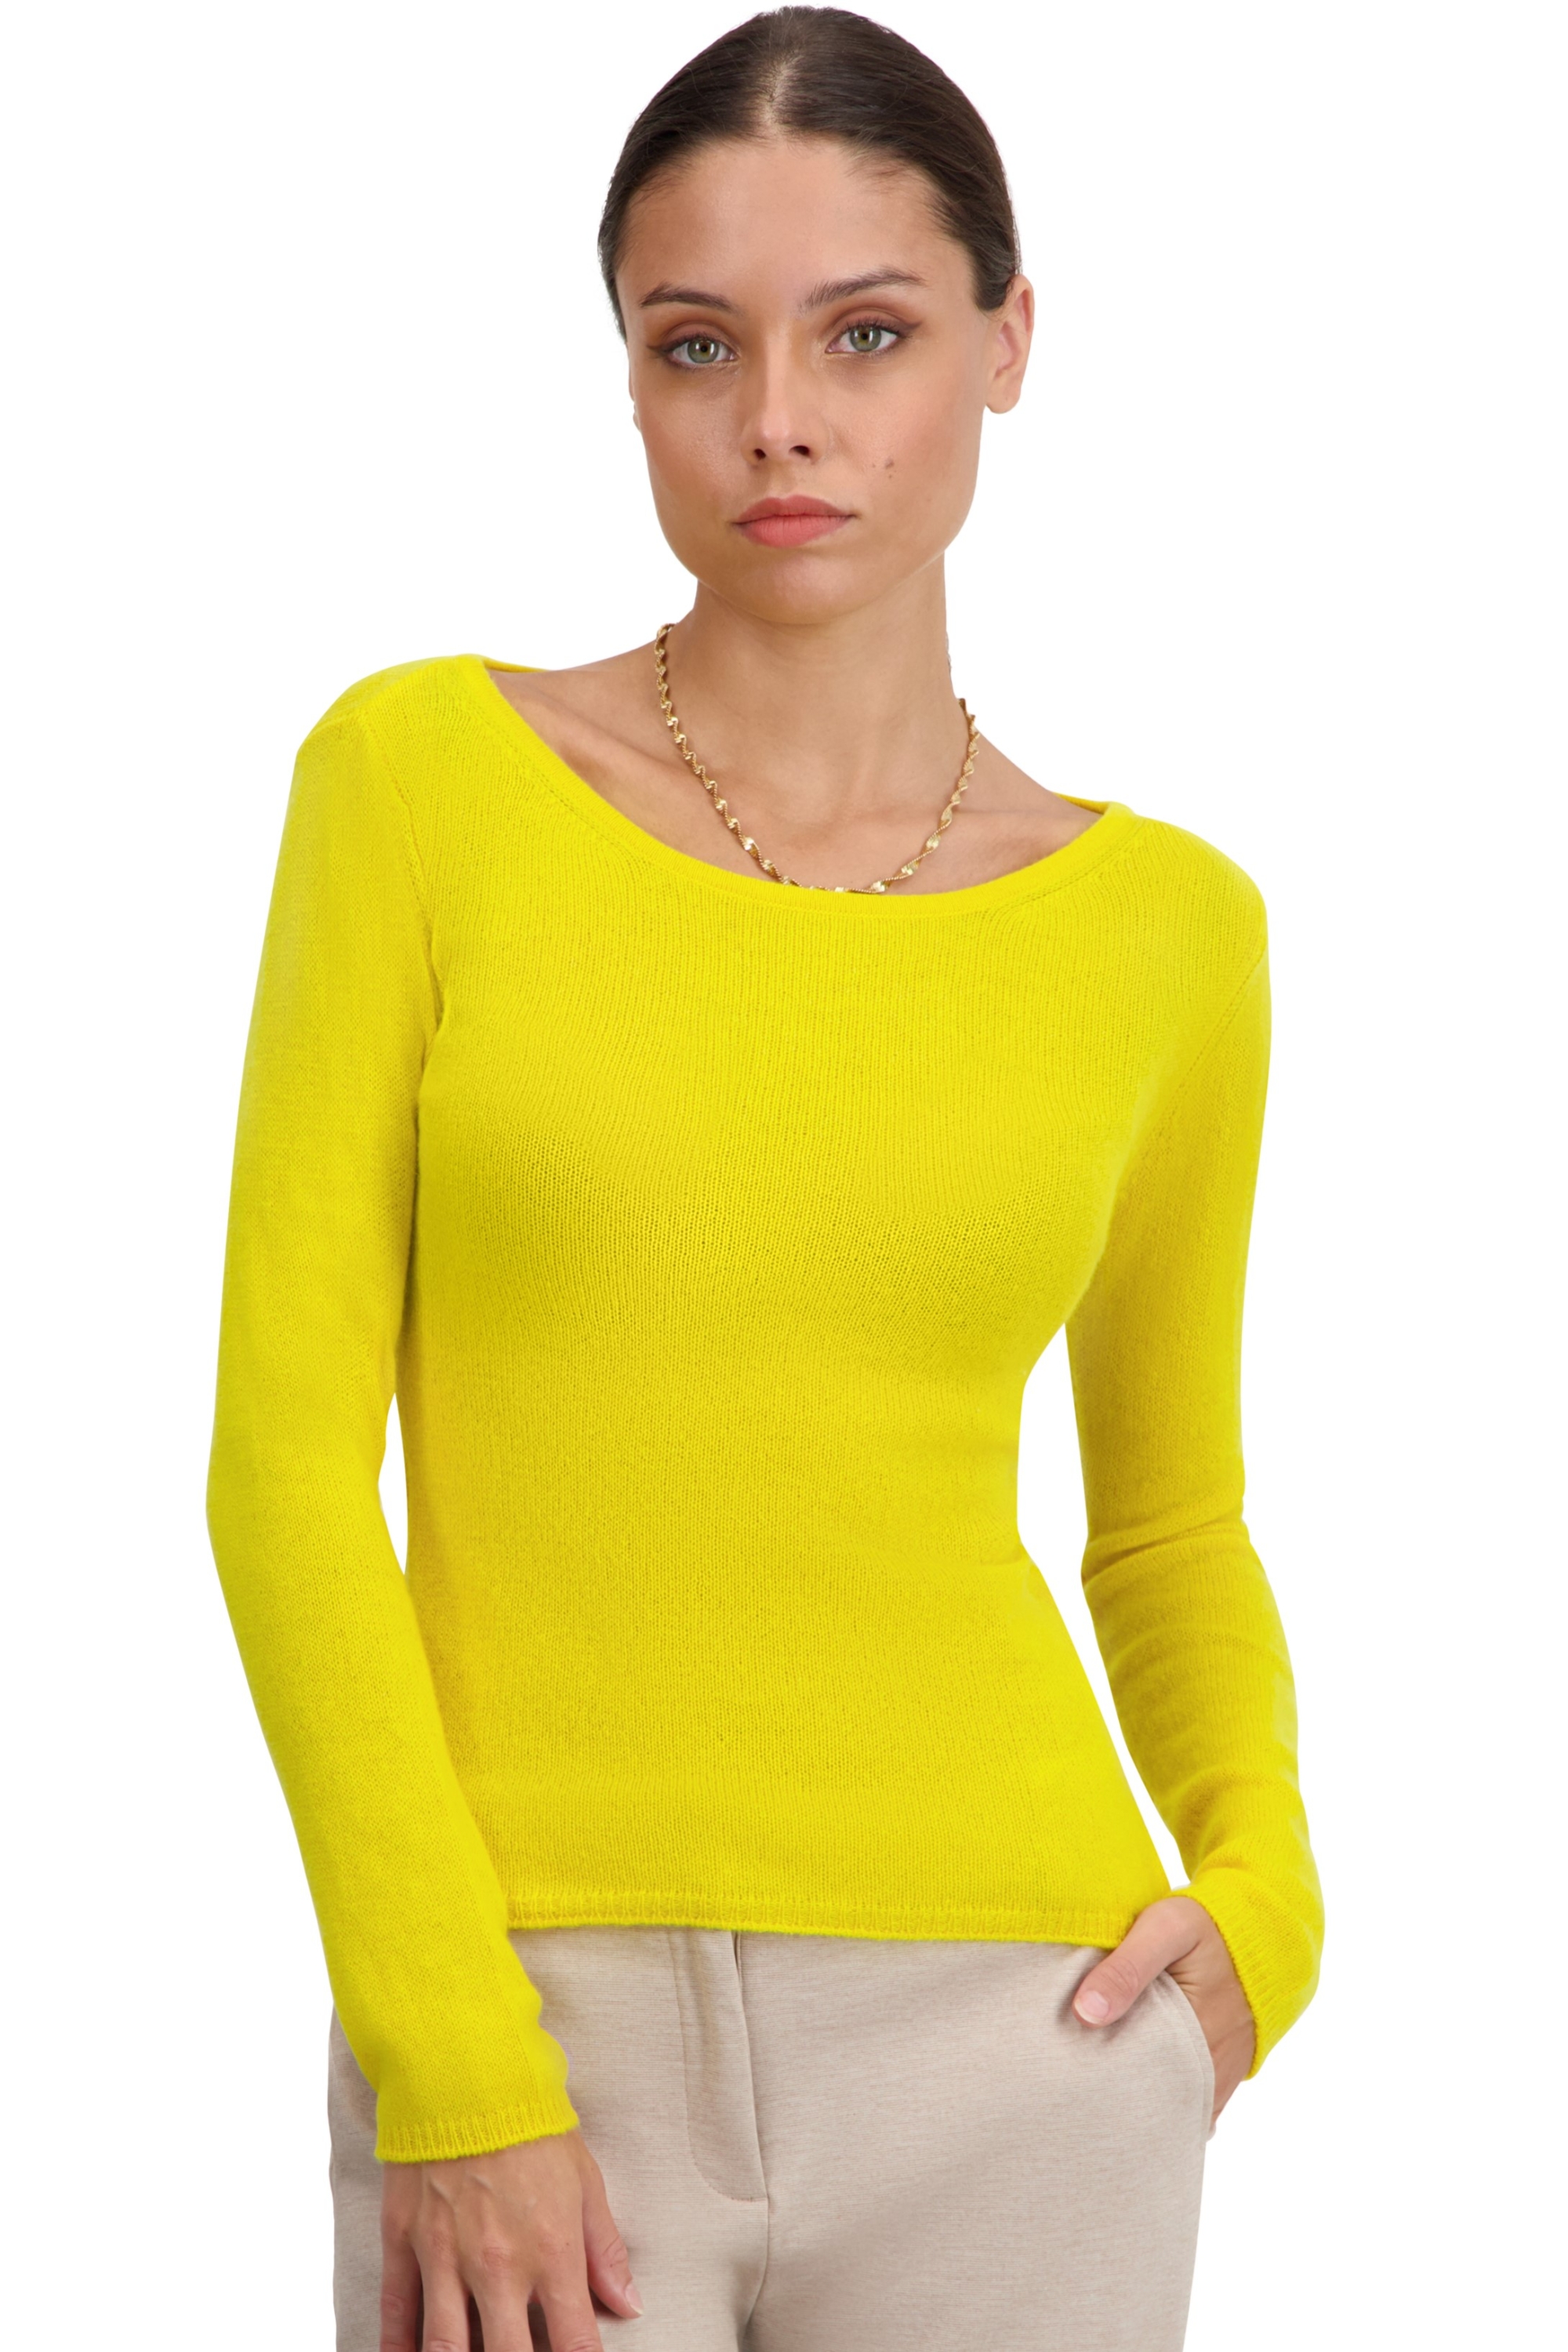 Cashmere ladies timeless classics caleen cyber yellow 3xl